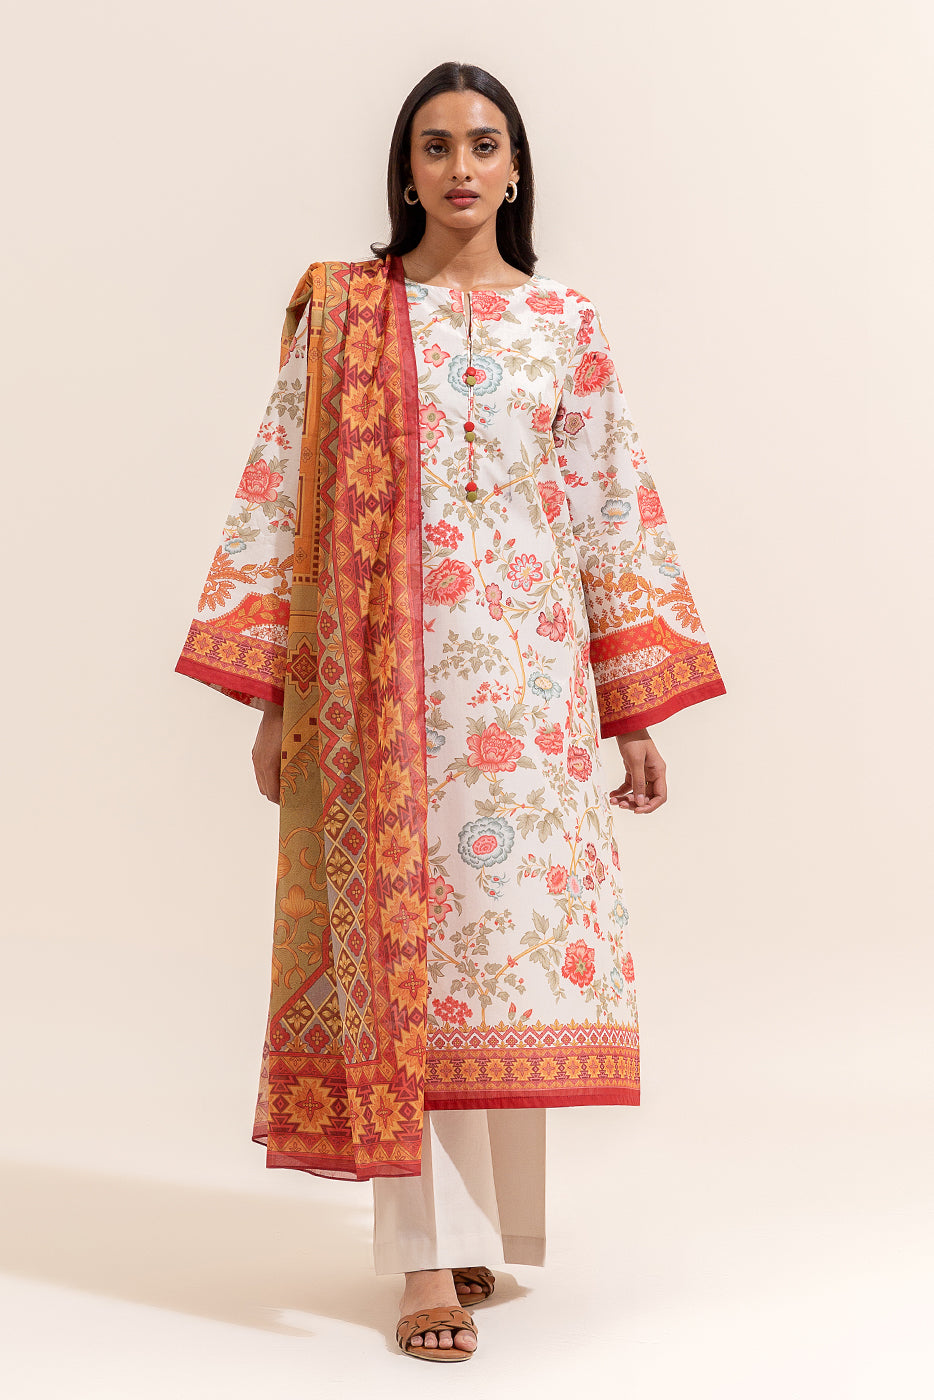 3 PIECE PRINTED LAWN SUIT-CHINTZ CANDY (UNSTITCHED)